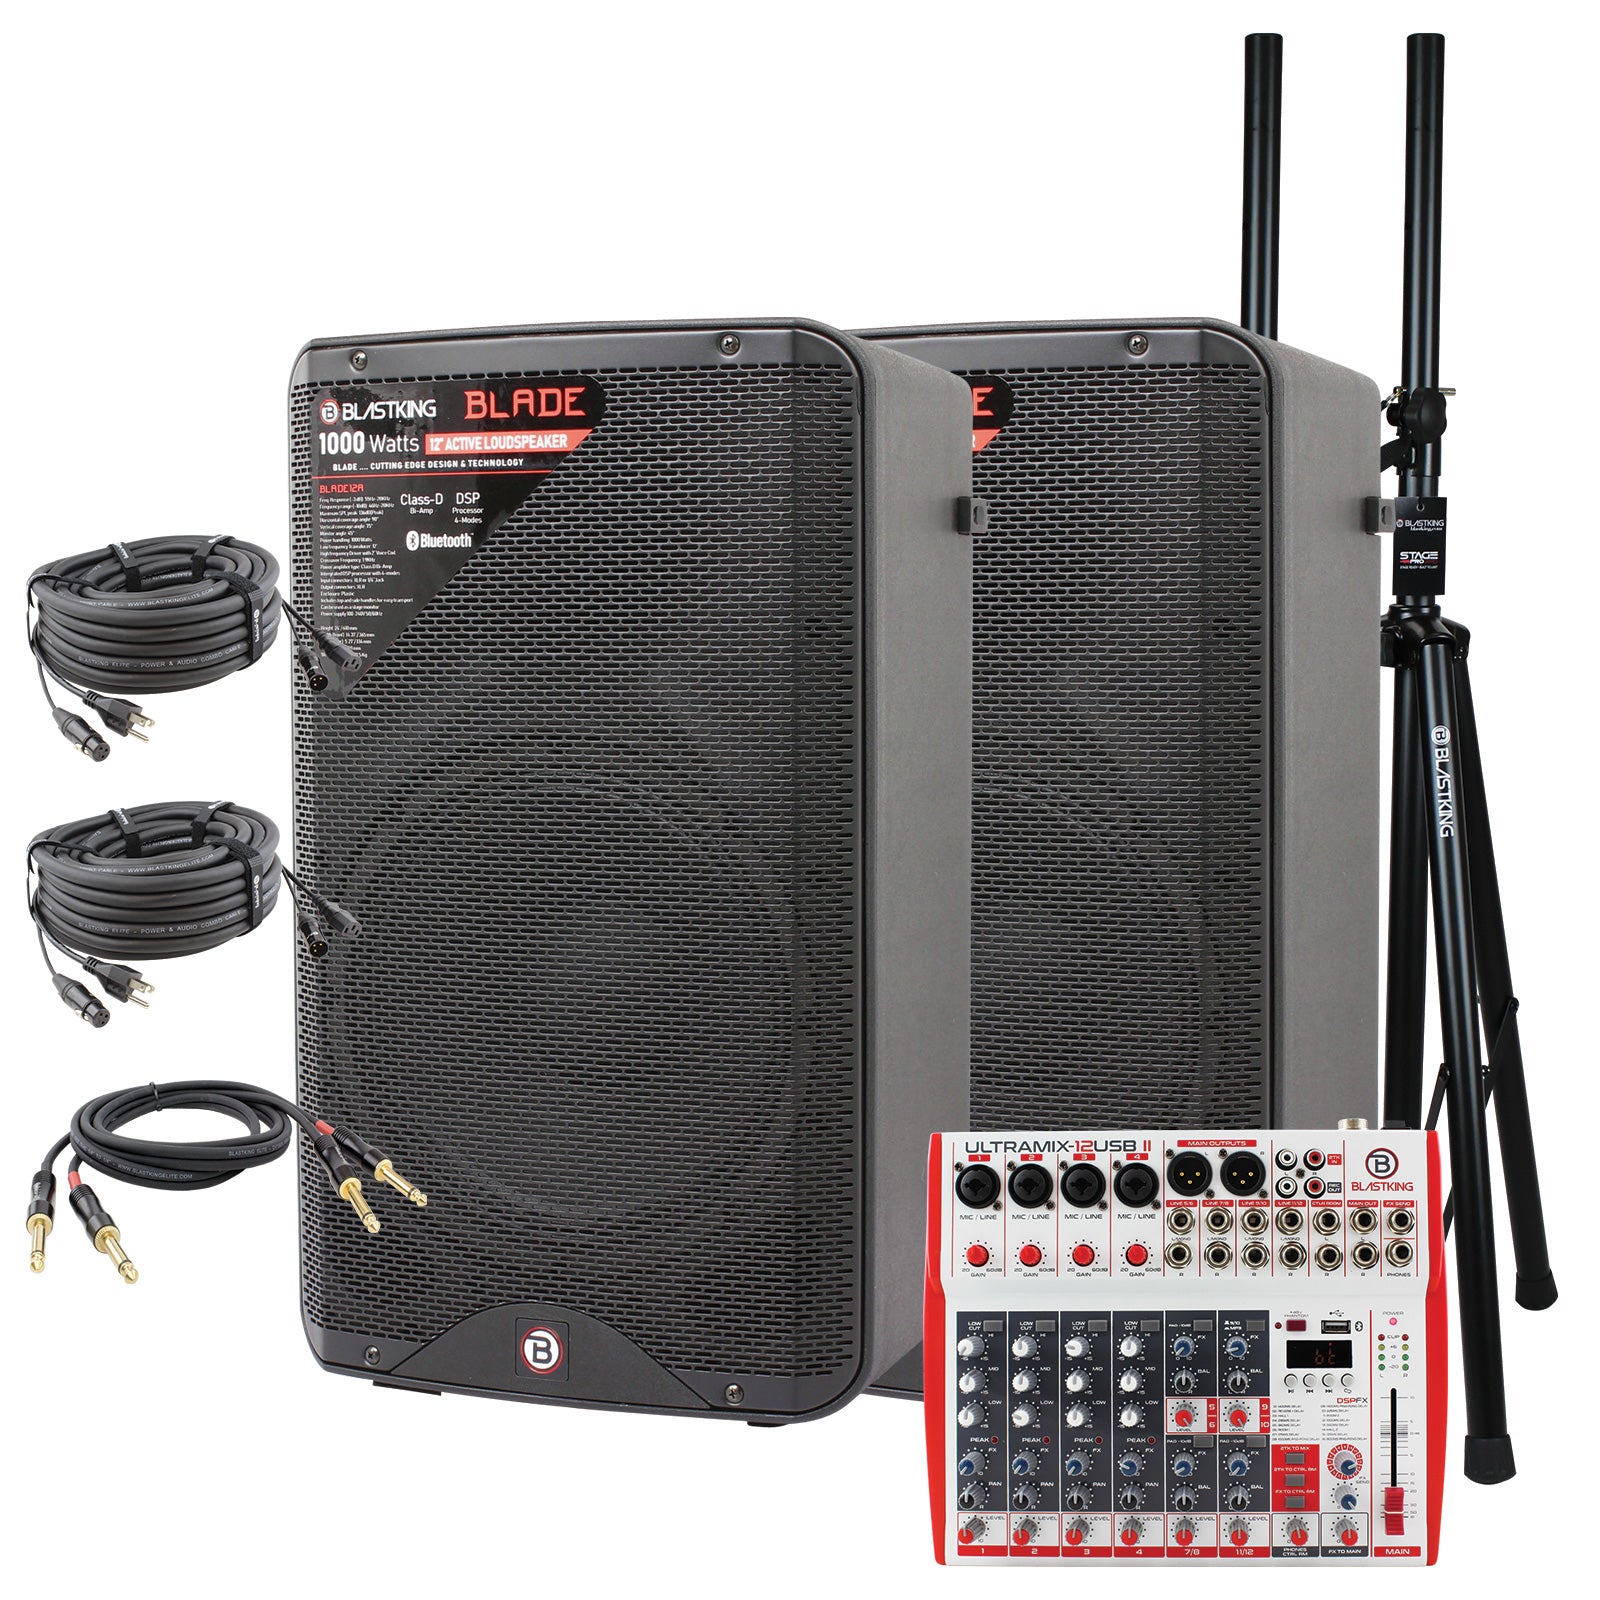 Blastking BLADE12A-PK1 (2) 12” BLADE12A Speaker 1000 Watts + 12 Channel Analog Mixing Console + Stands + Cables